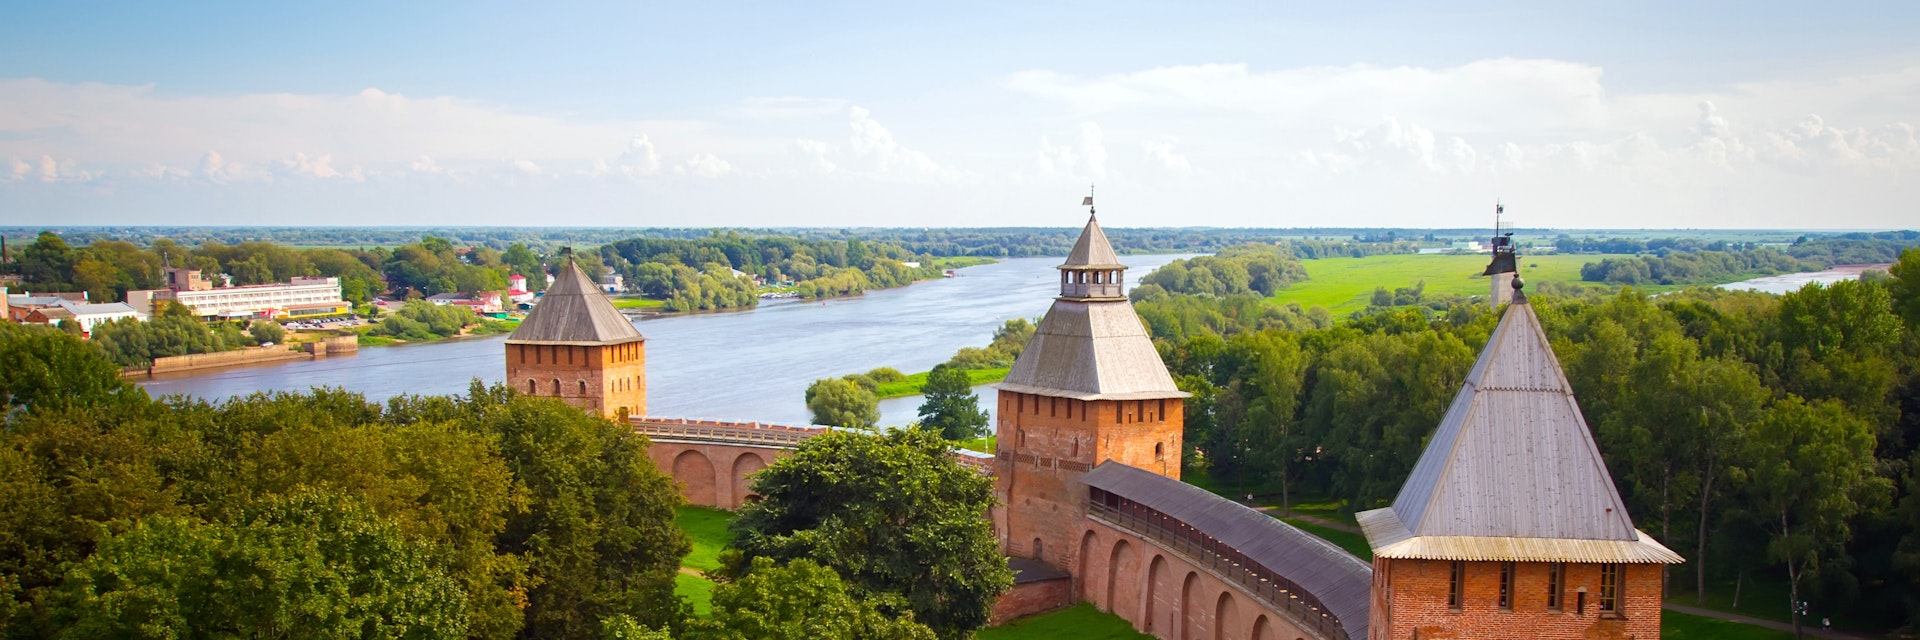 View from one of towers of the Kremlin in Veliky Novgorod.